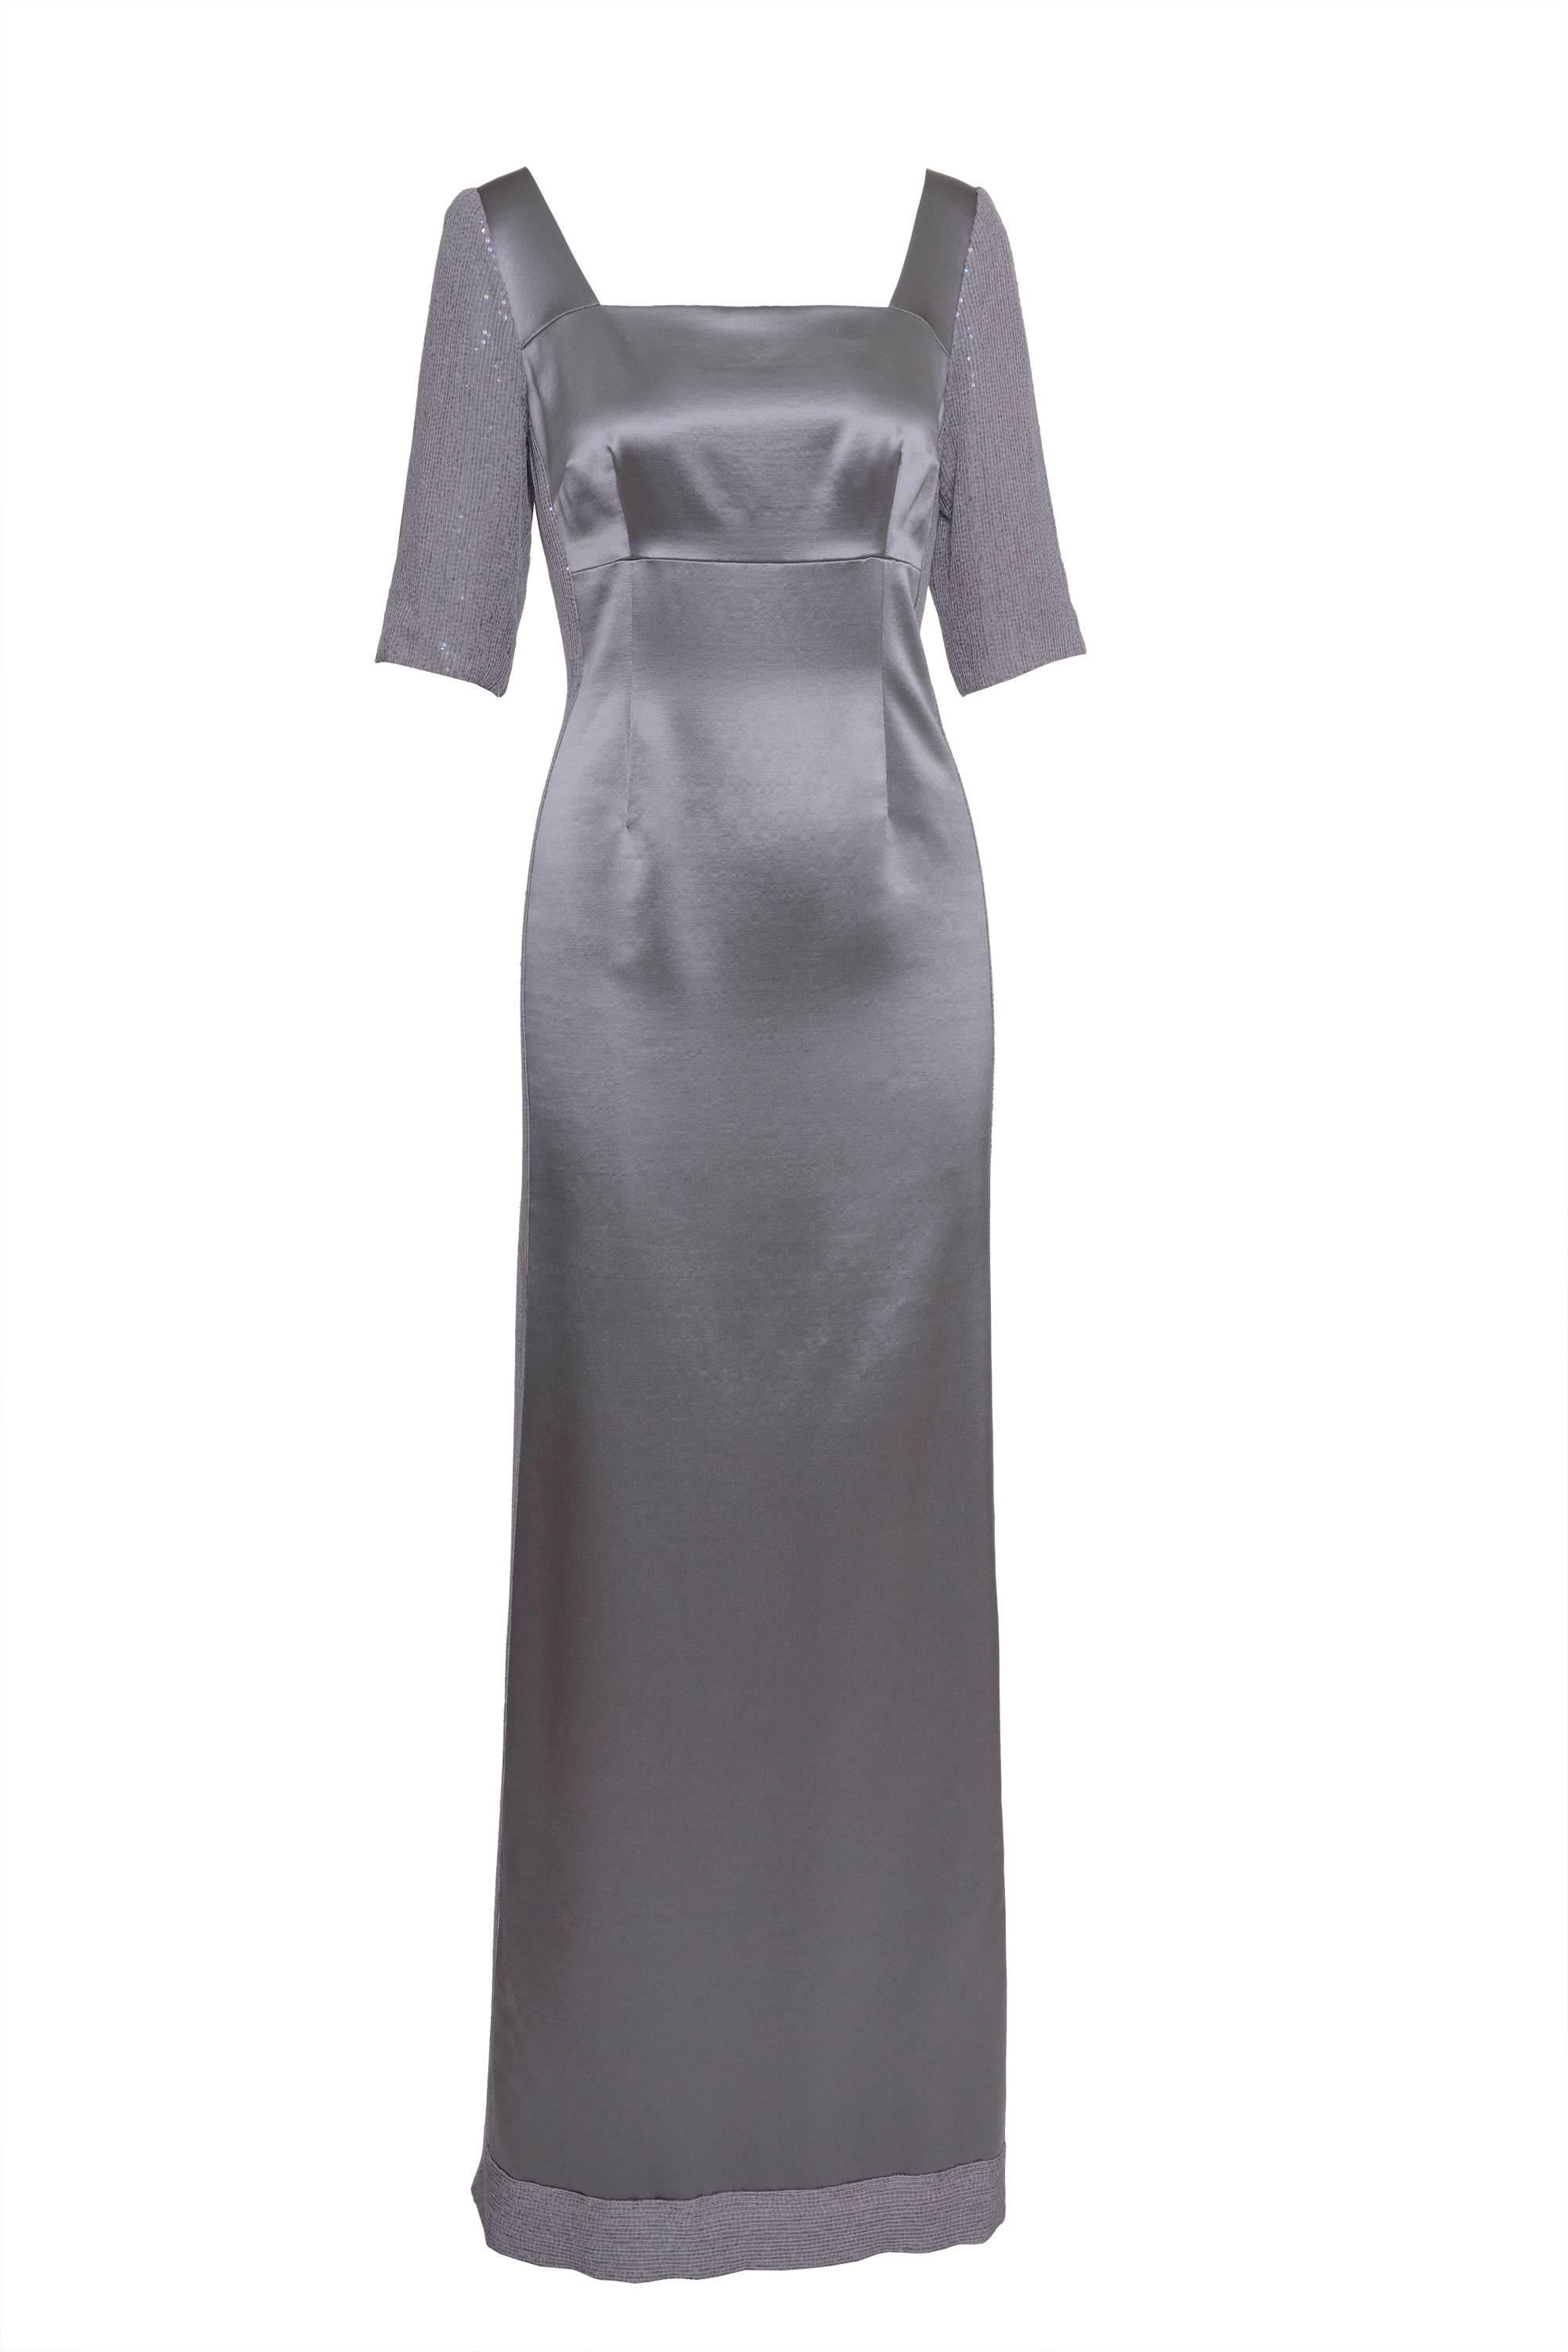 This gorgeous 1990s gray satin dress has 4 frontal darts, empire waistline, sleeves and sides embroidered, side zip closure, florentine frontal neckline and deep back neckline with 2 embroidered pieces. It has long skirt and side vent.

Excellente